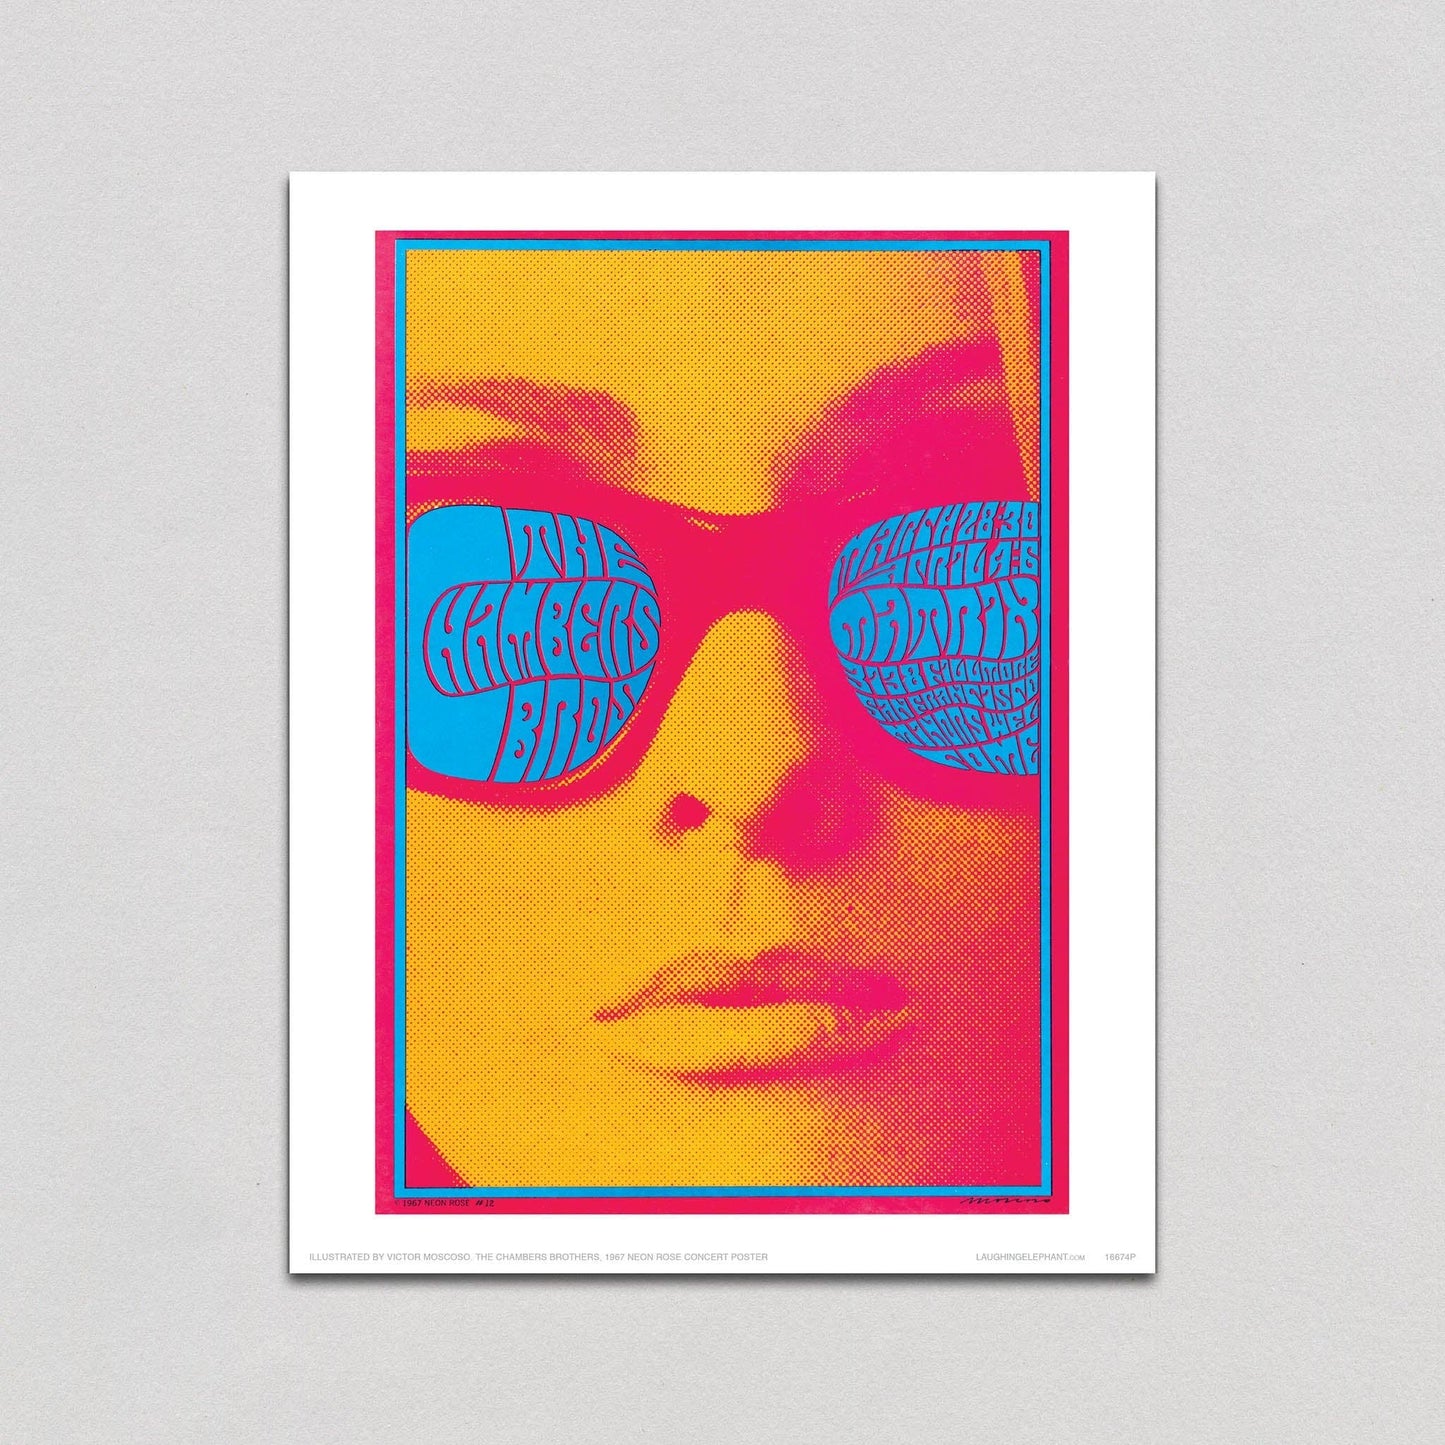 Groovy Sunglasses - Psychedelic Posters Print